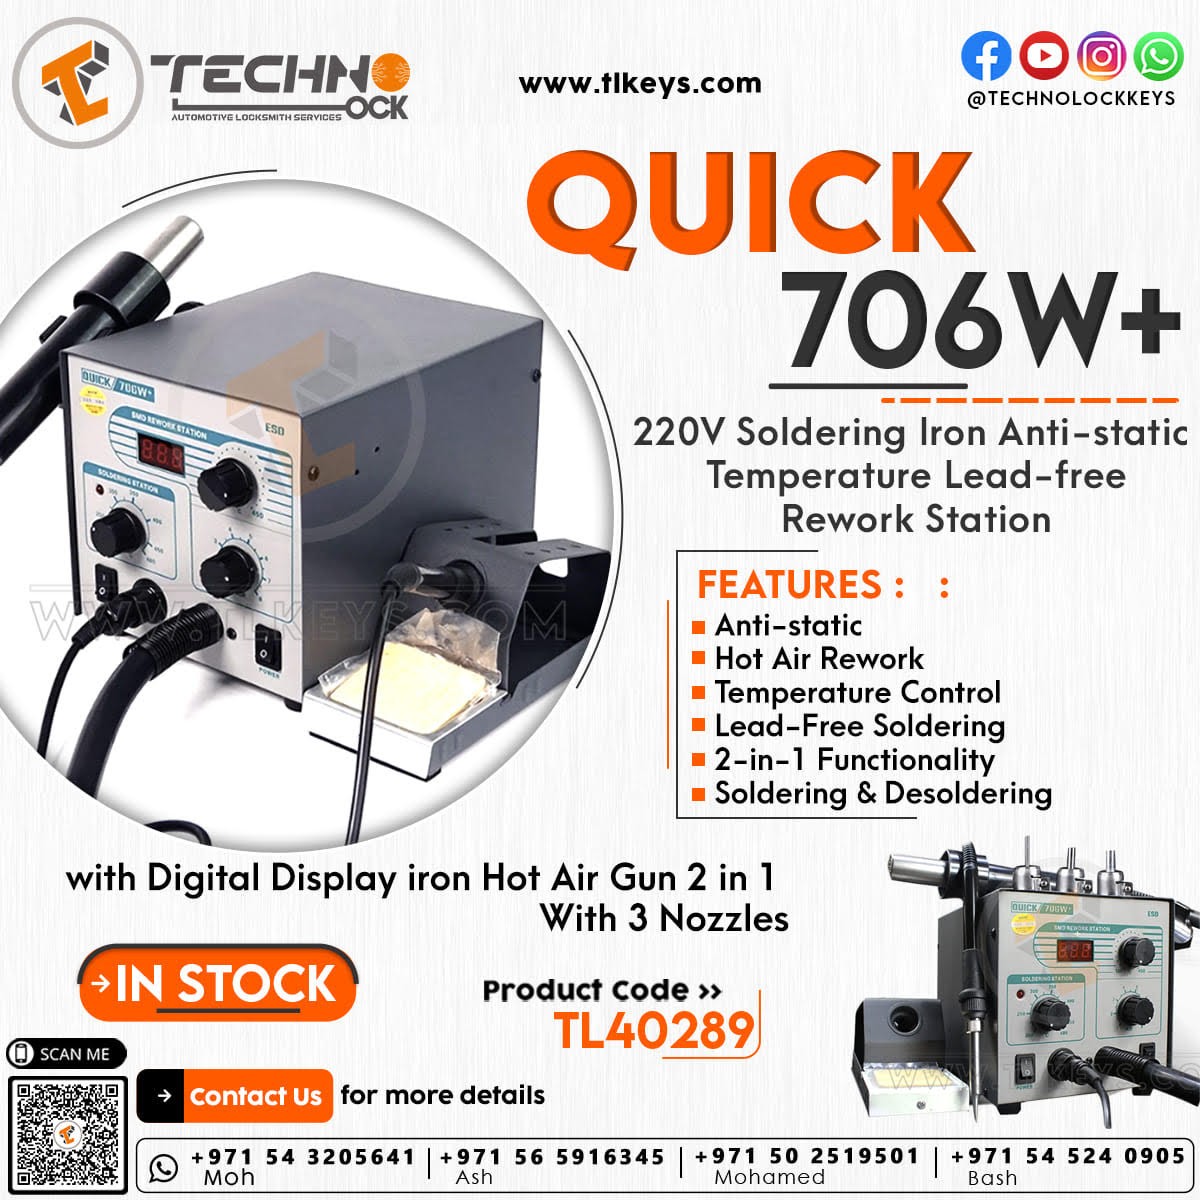 Experience precision and versatility with the state-of-the-art QUICK 706W+ Rework Station, your ultimate tool for mastering electronics craftsmanship